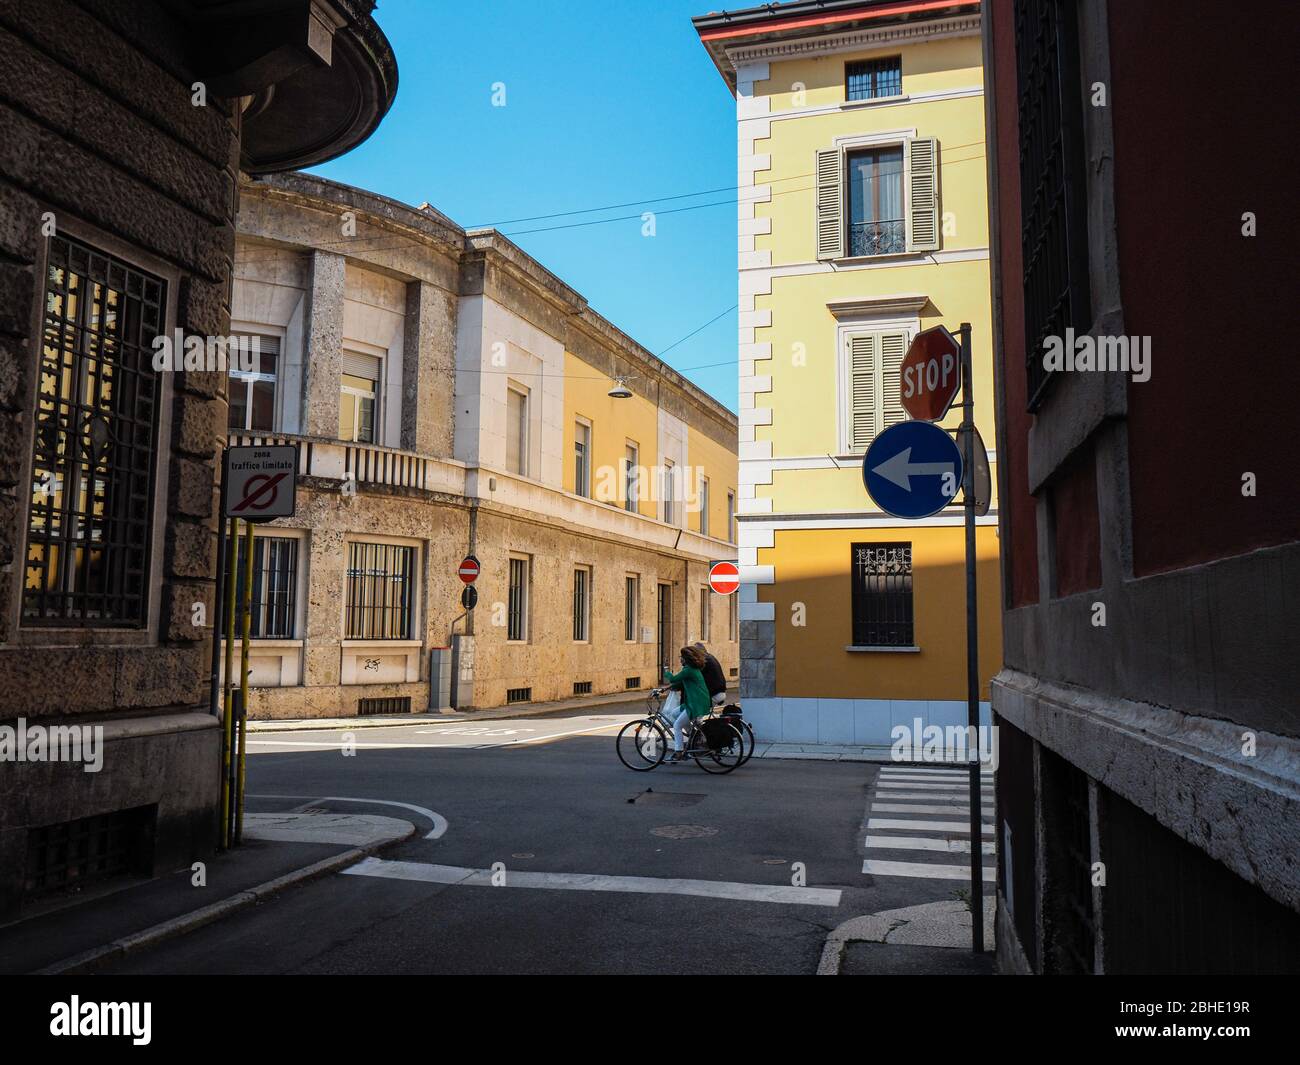 Cremona, Lombardy, Italy - April 25 th 2020 - deserted cityscapes in the center and everyday city life during coronavirus outbreak city lockdown Stock Photo